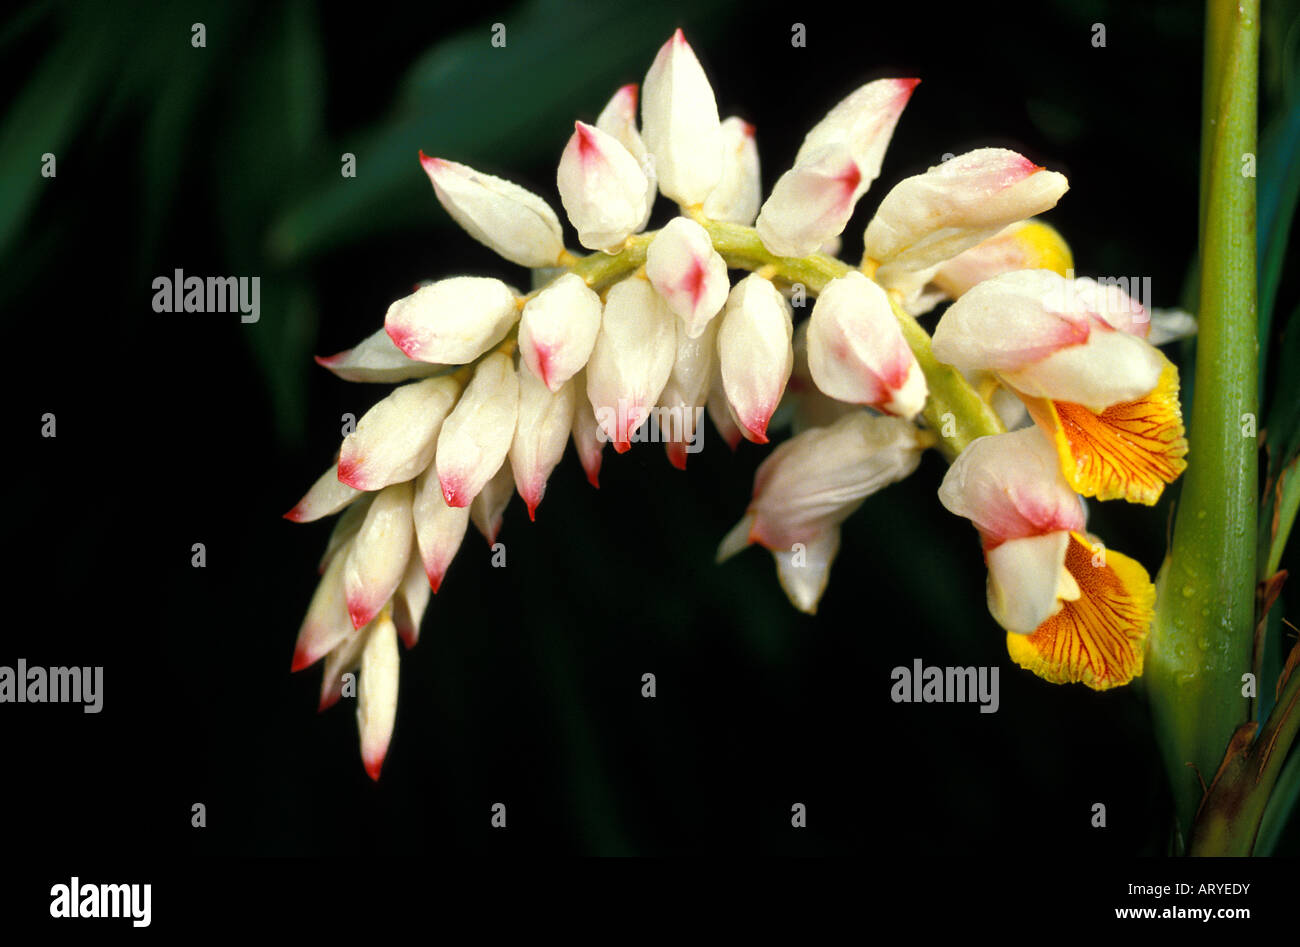 close-up blooming spray of shell ginger (Alpinia zerumbet), its blossoms white with pink tips as buds, with yellow-and-red Stock Photo